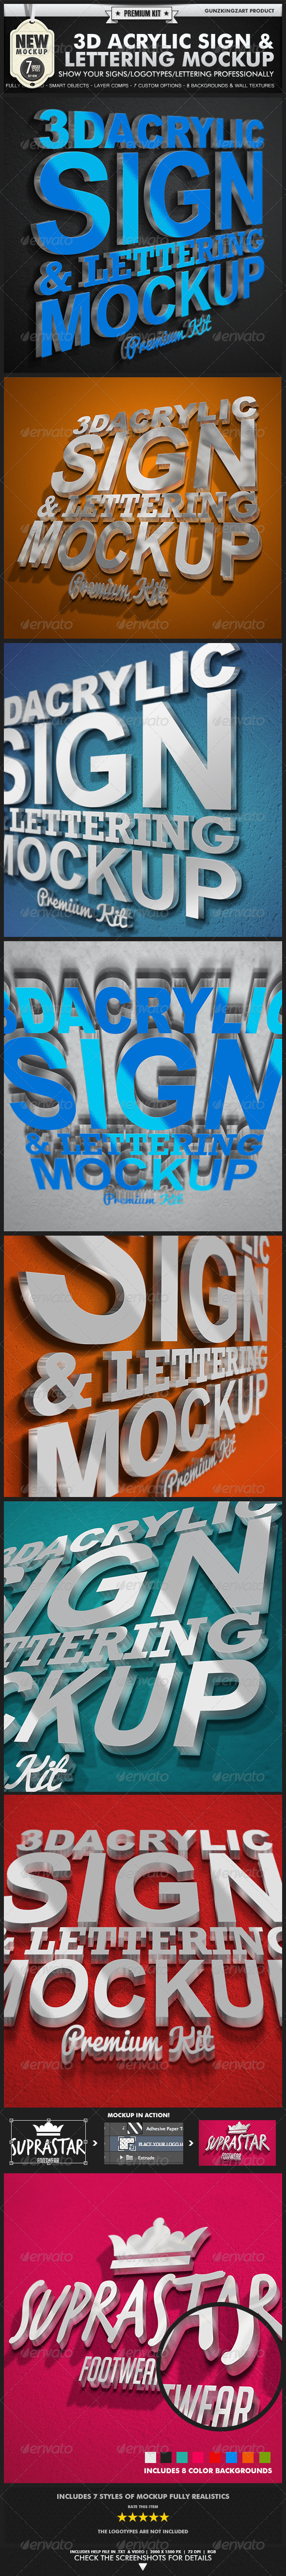 Download 3d Acrylic Sign Mockup Premium Kit By Gunzkingzart Graphicriver